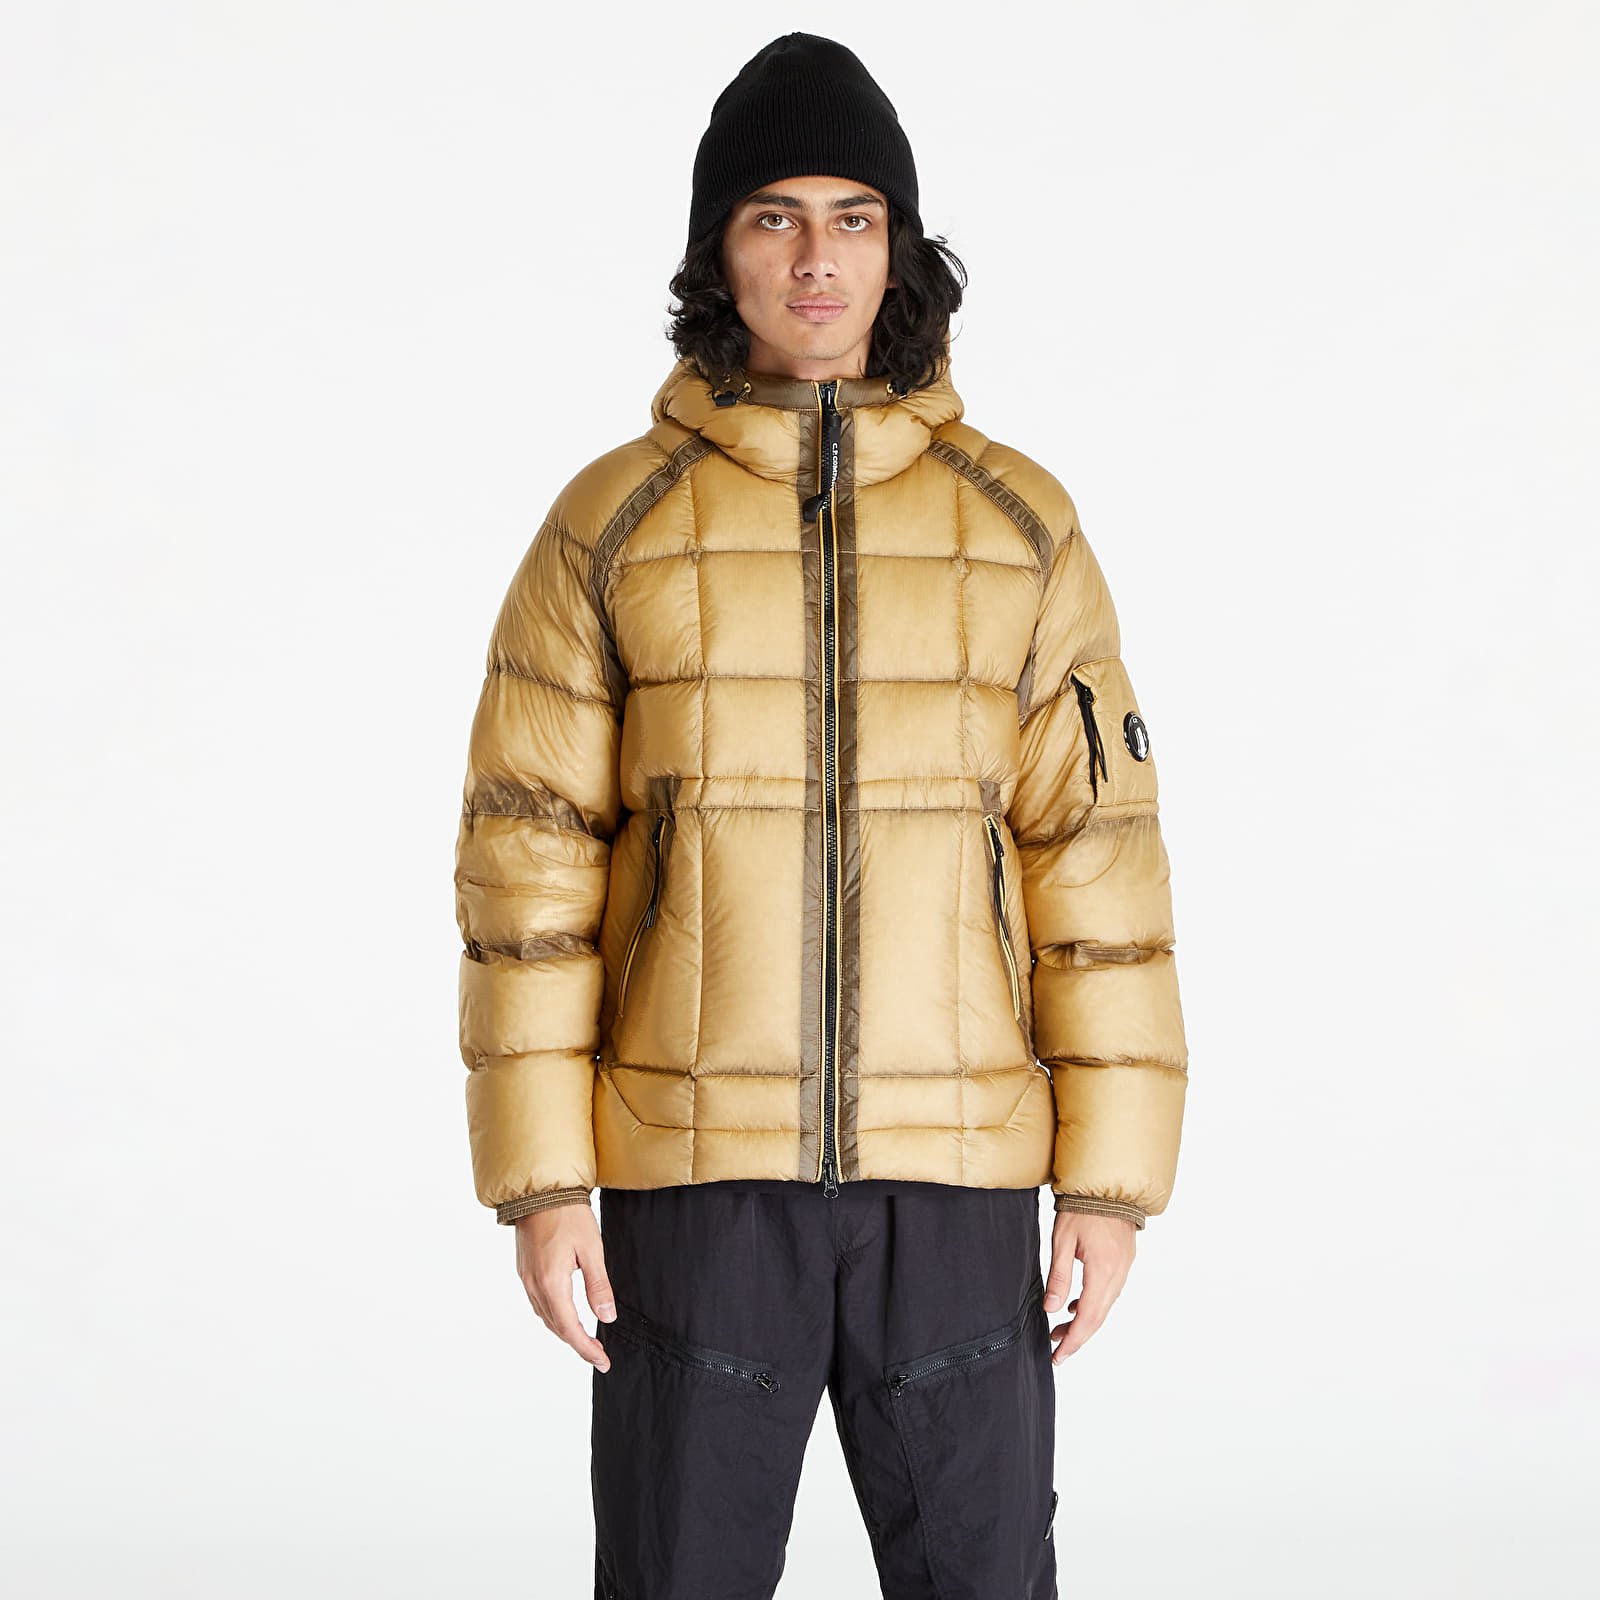 D.D.Shell Hooded Down Jacket